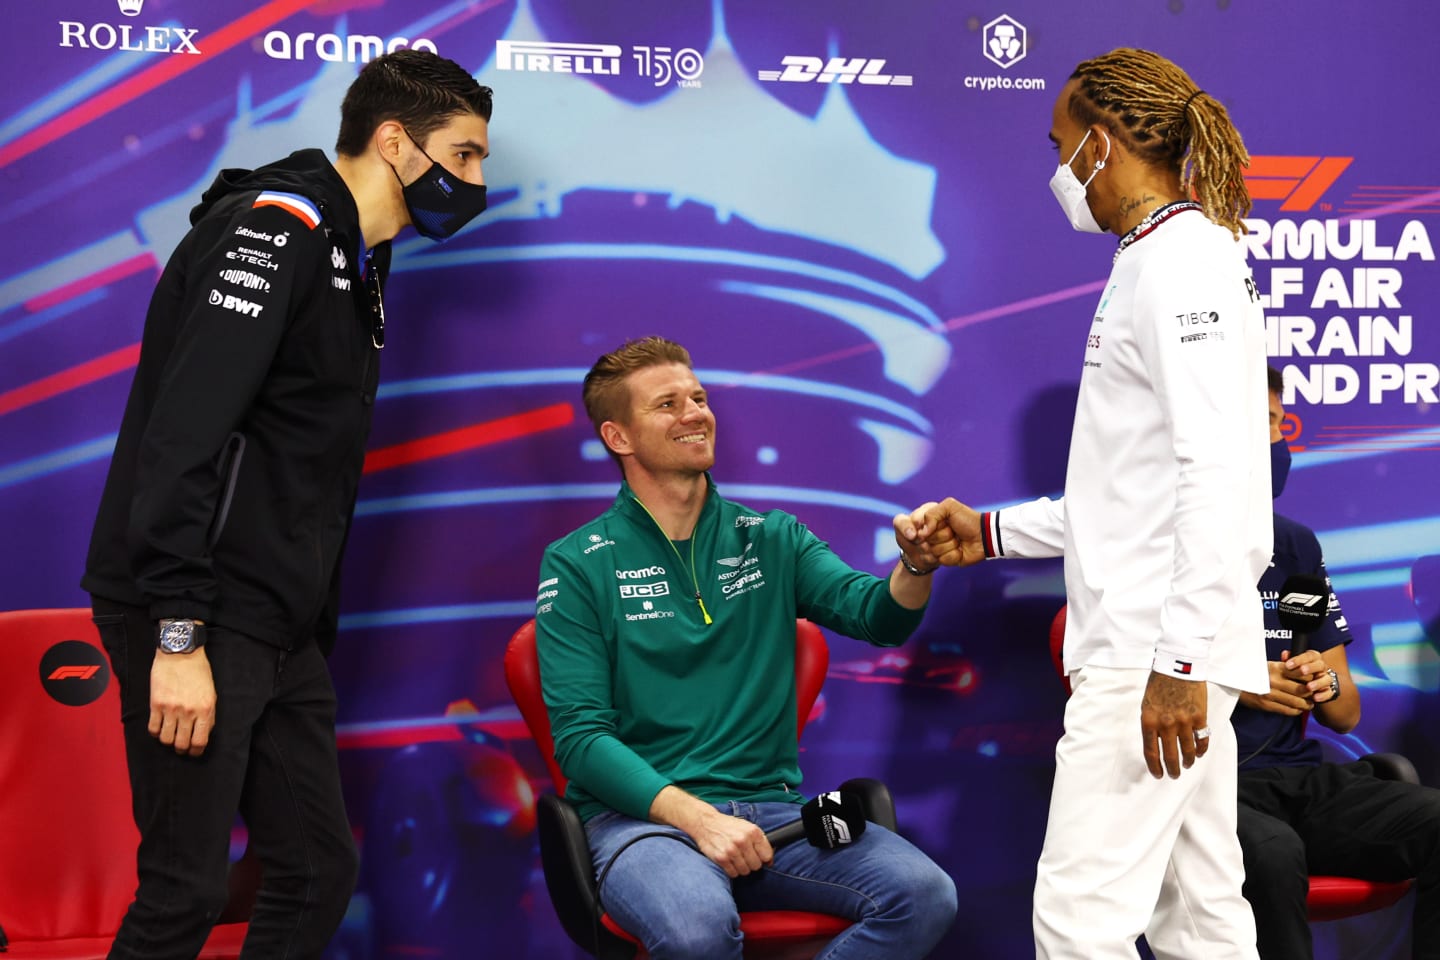 BAHRAIN, BAHRAIN - MARCH 18: Lewis Hamilton of Great Britain and Mercedes (R) and Esteban Ocon of France and Alpine F1 (L) greet Nico Hulkenberg of Germany and Aston Martin F1 Team (C) to the Drivers Press Conference before practice ahead of the F1 Grand Prix of Bahrain at Bahrain International Circuit on March 18, 2022 in Bahrain, Bahrain. (Photo by Lars Baron/Getty Images)